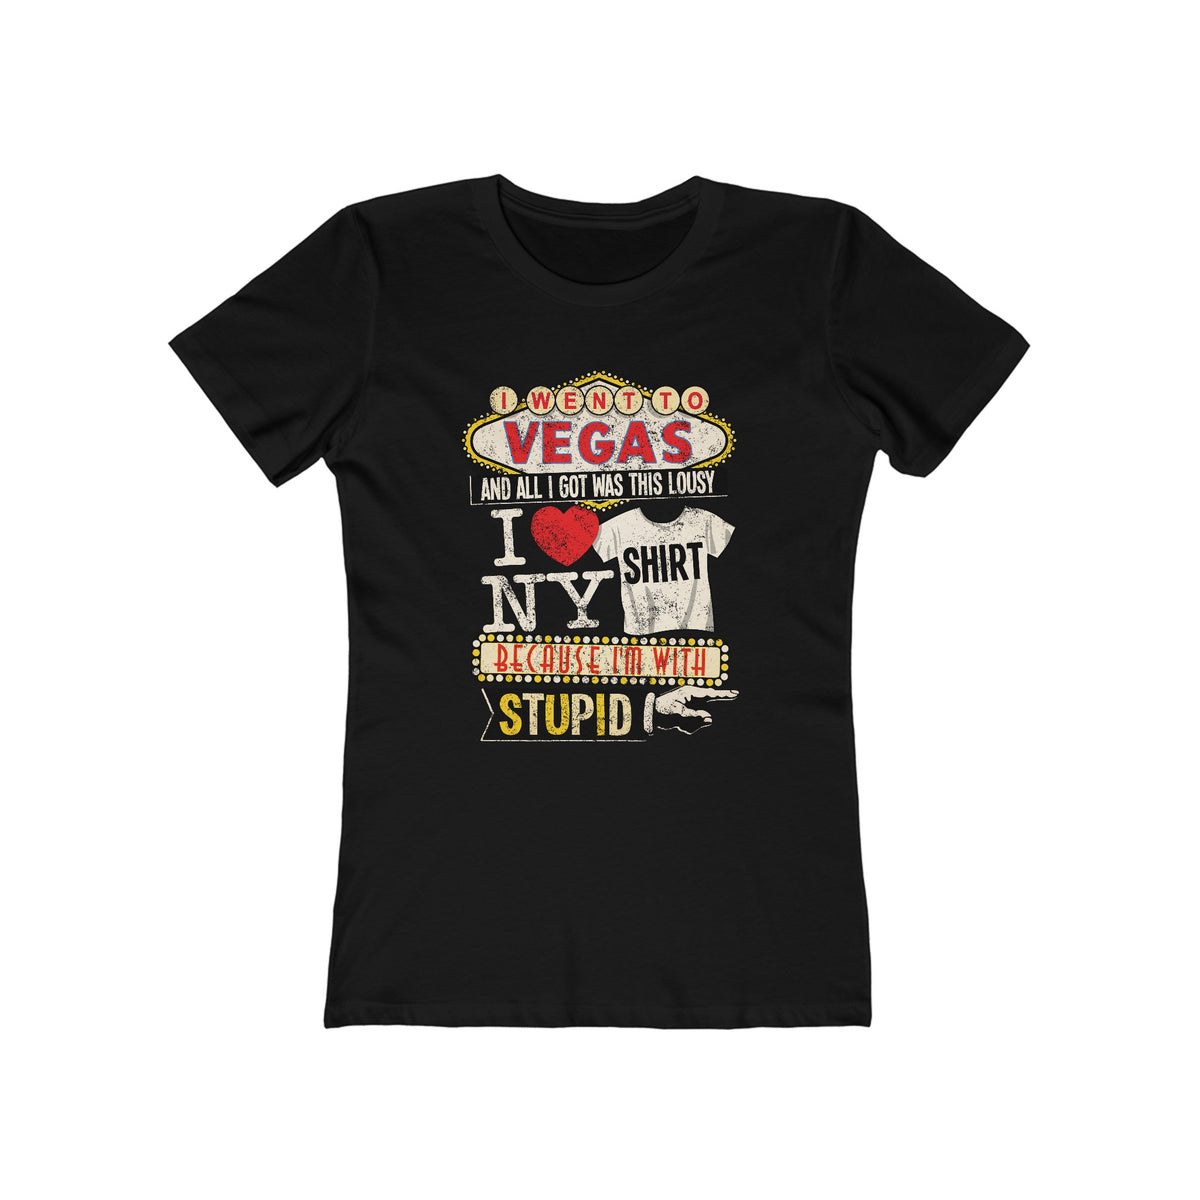 I Went To Vegas And All I Got Was This Lousy I (Heart) Ny Shirt Because I'm With Stupid - Women’s T-Shirt